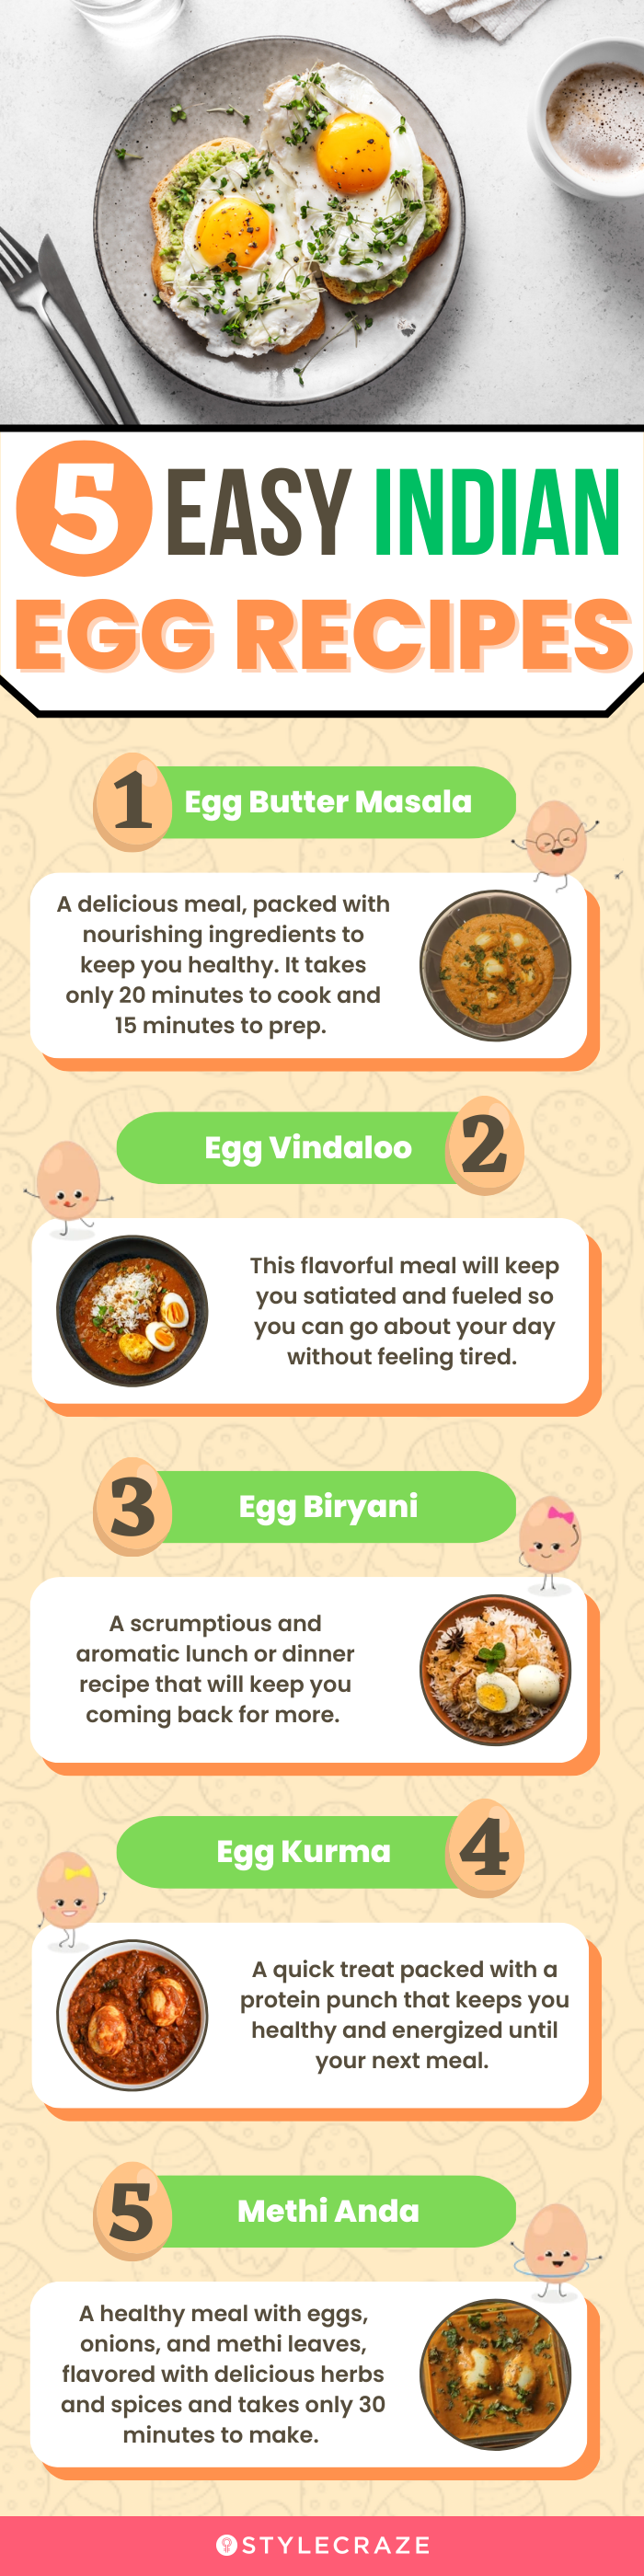 5 easy indian egg recipes (infographic)